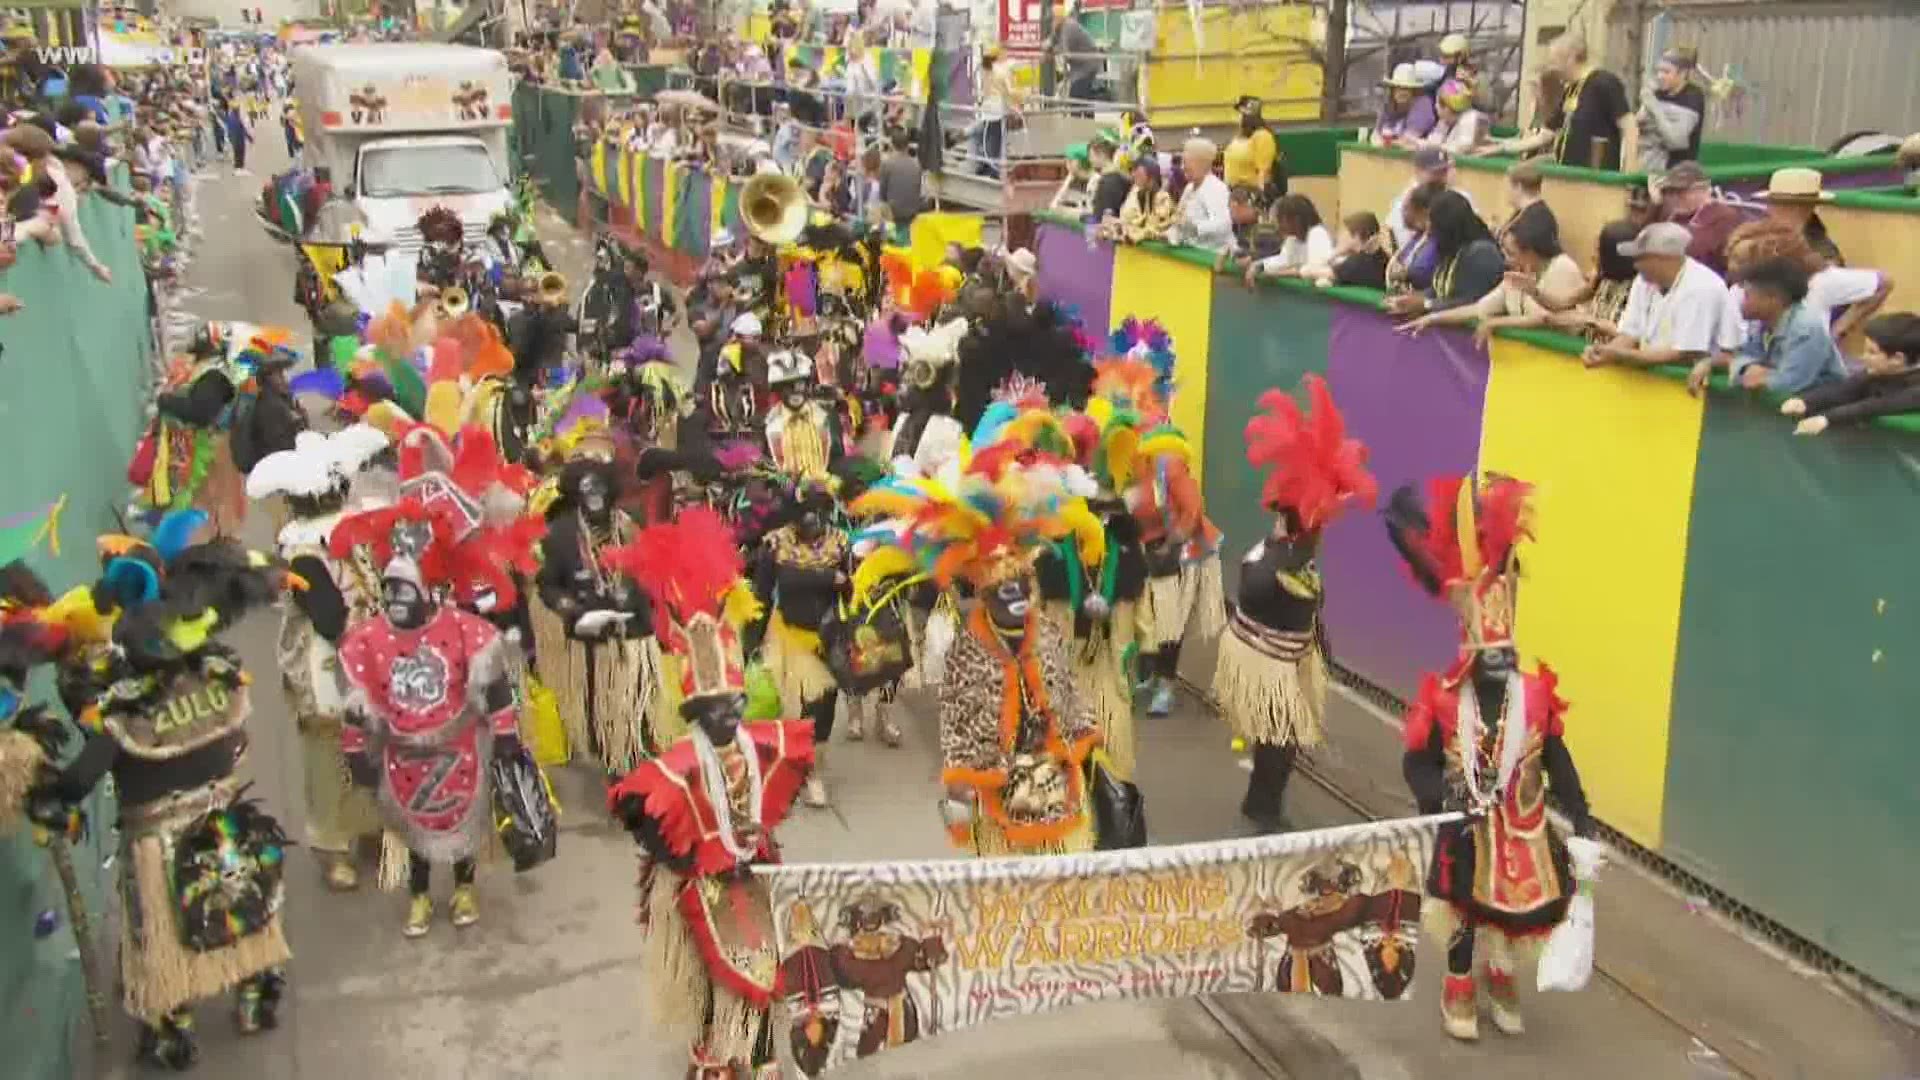 Mardi Gras krewes are having to cancel their parades for 2021 due to the coronavirus restrictions.